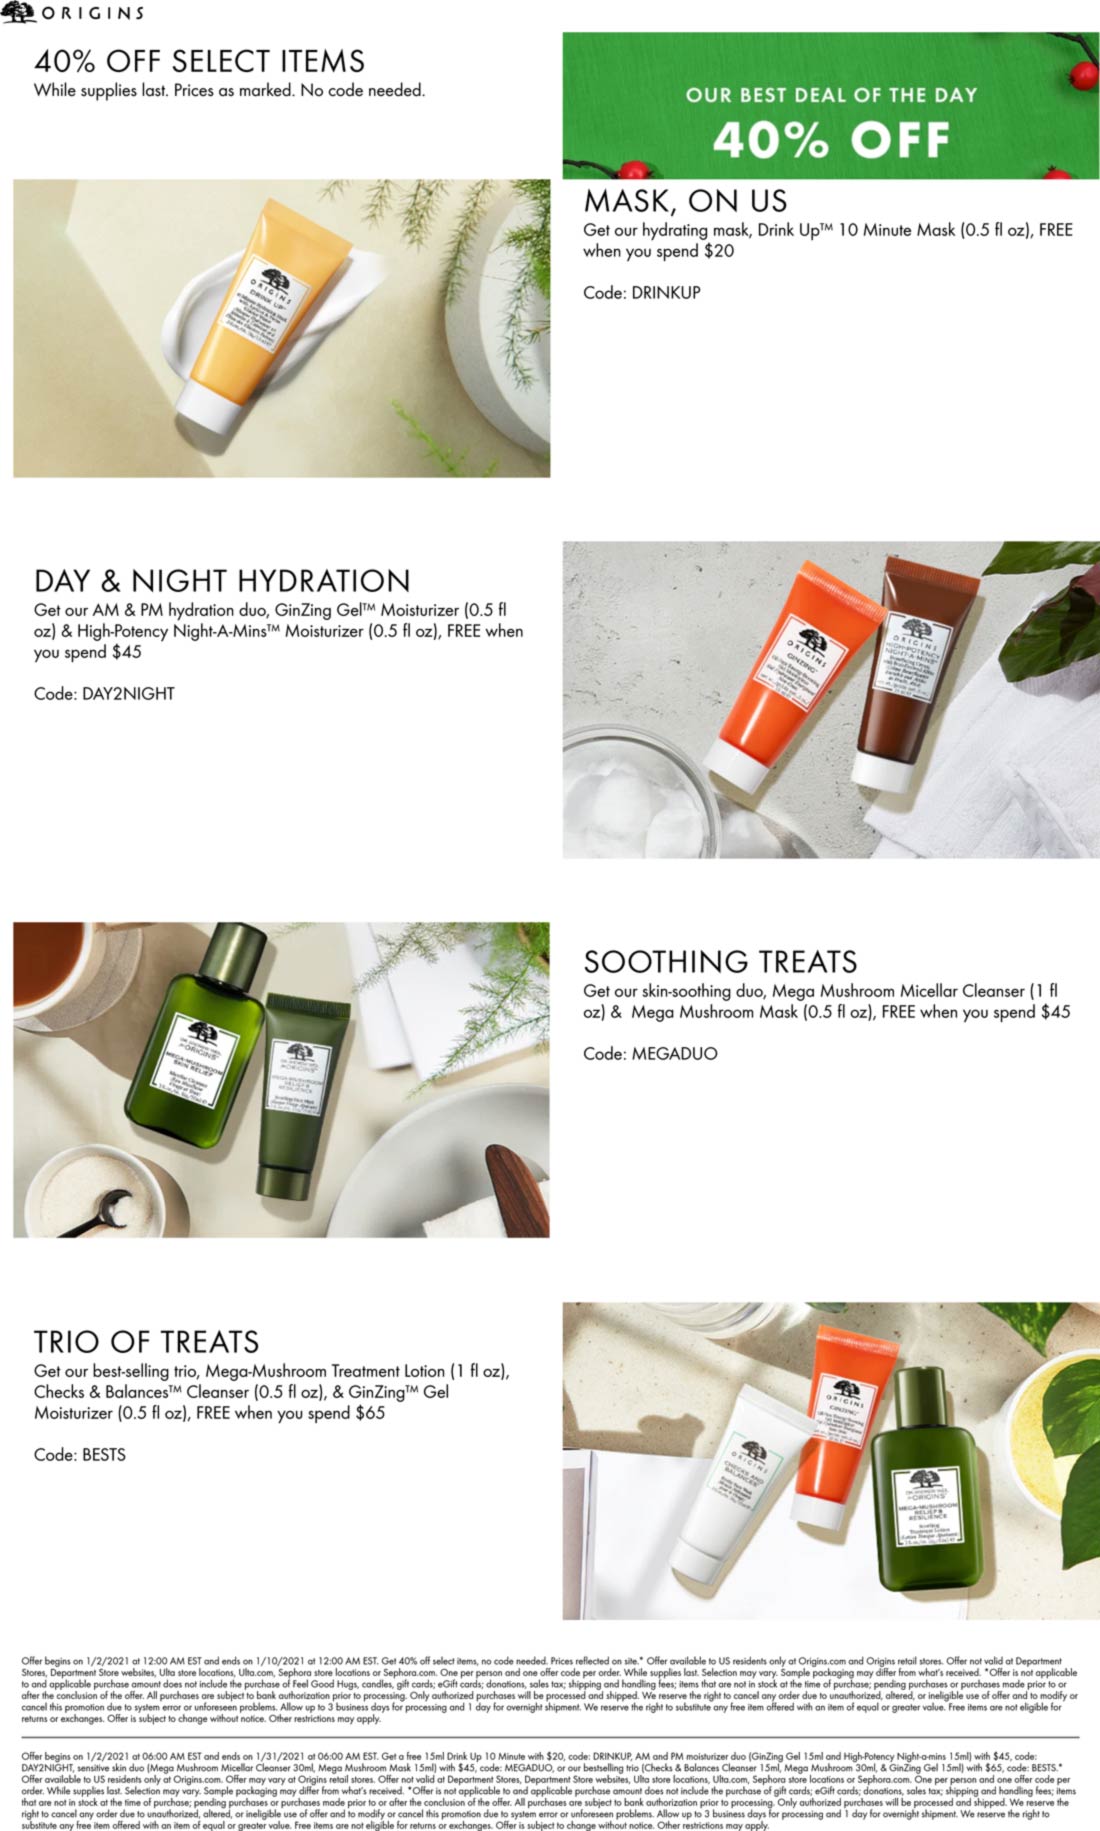 Origins stores Coupon  Free mask, duo or 3pc trio on $20+ spent at Origins via promo codes DAY2NIGHT MEGADUO and BESTS #origins 